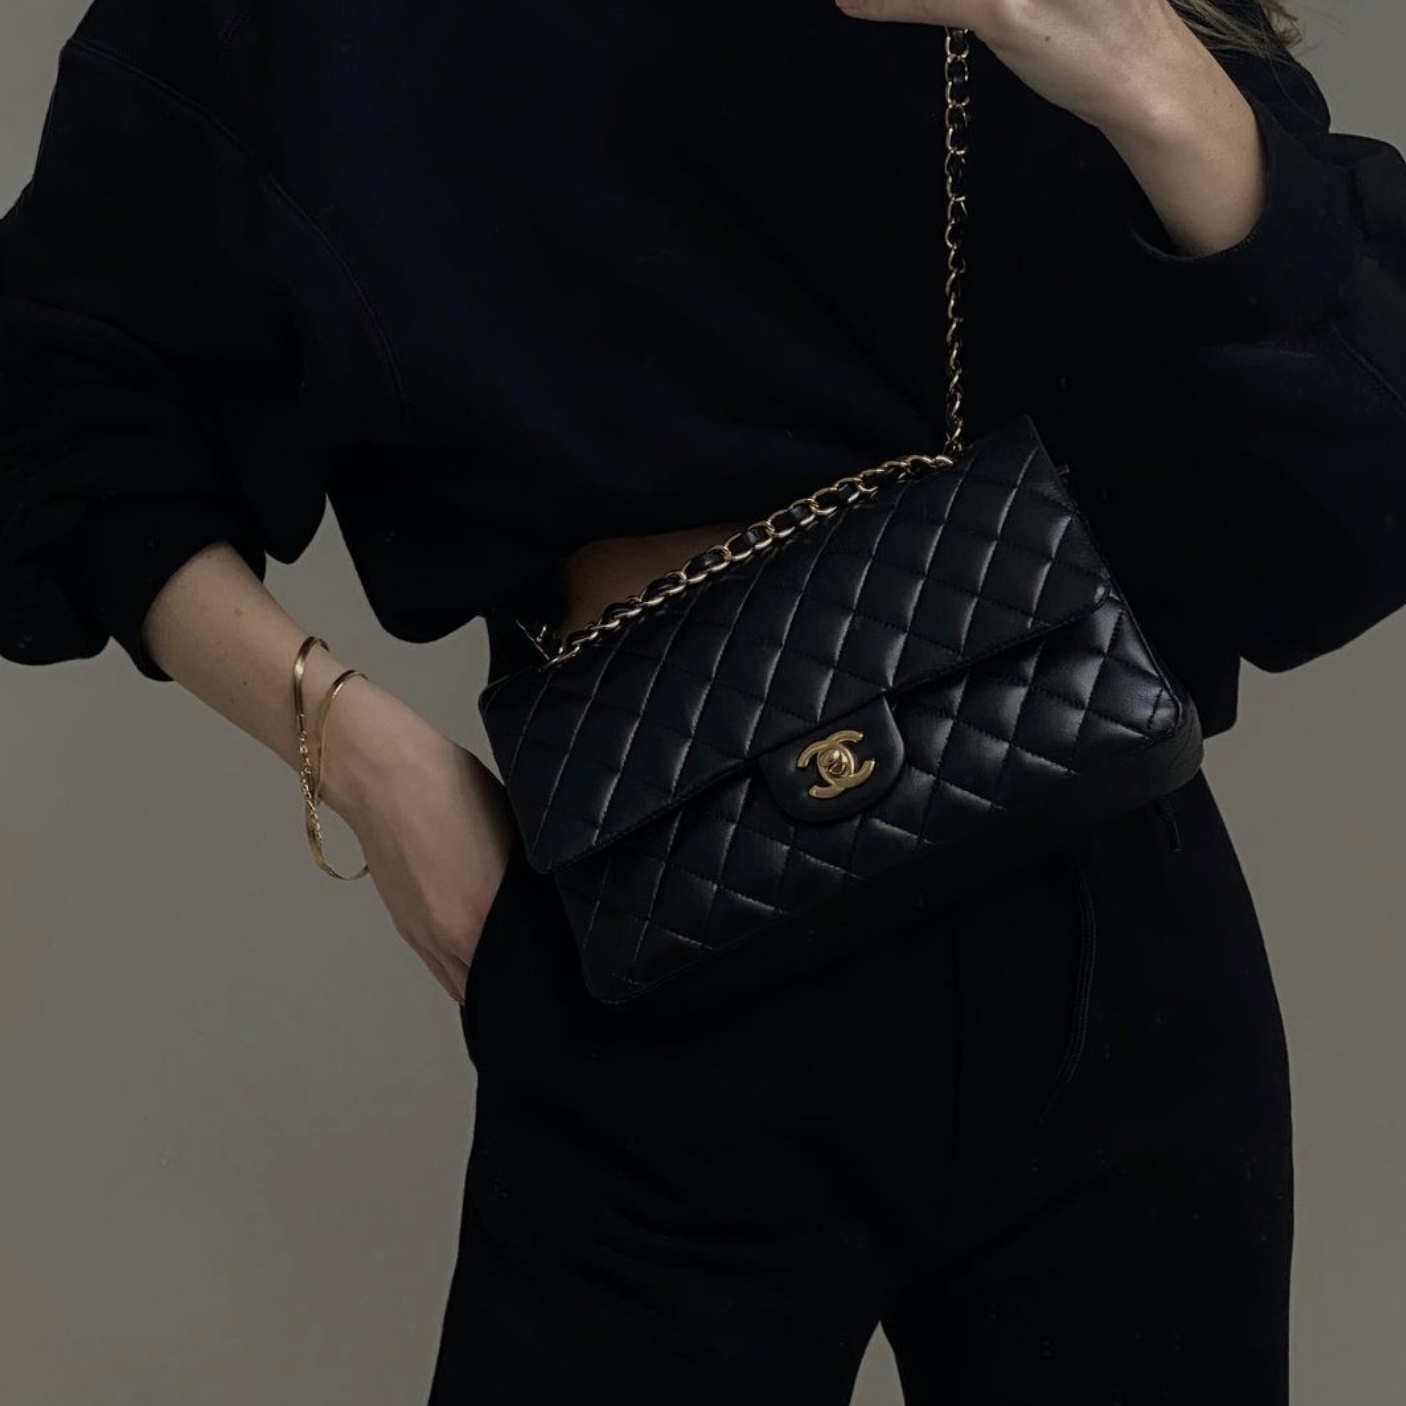 Chanel Vintage Black Quilted Lambskin Leather Classic Double Flap